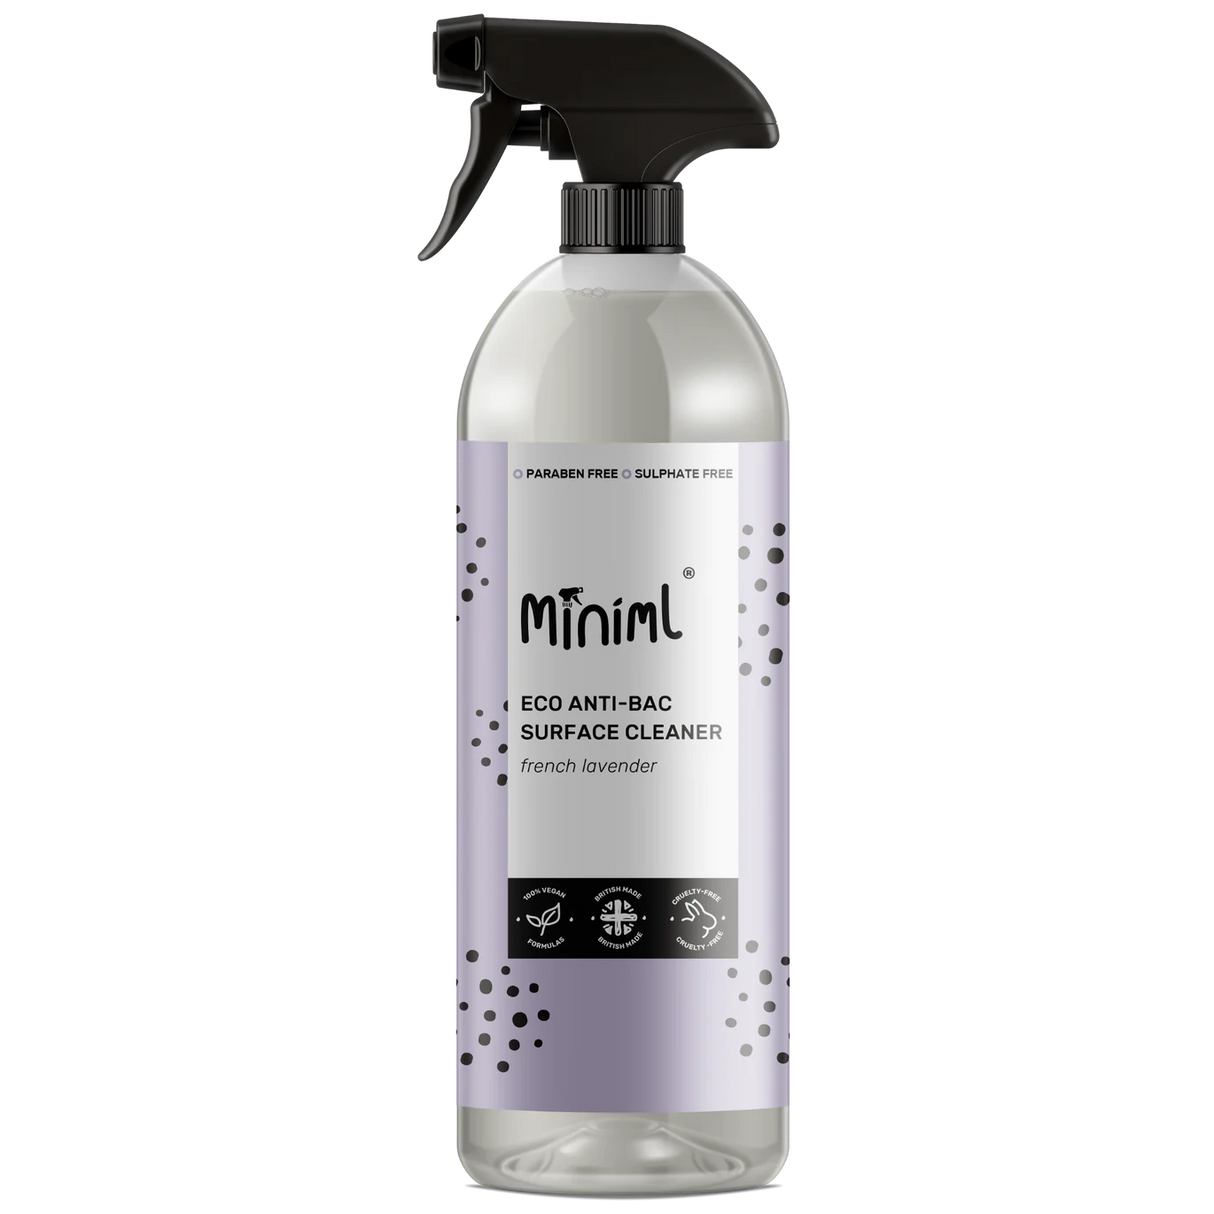 Miniml Anti-Bac Surface Cleaner French Lavender 750ml